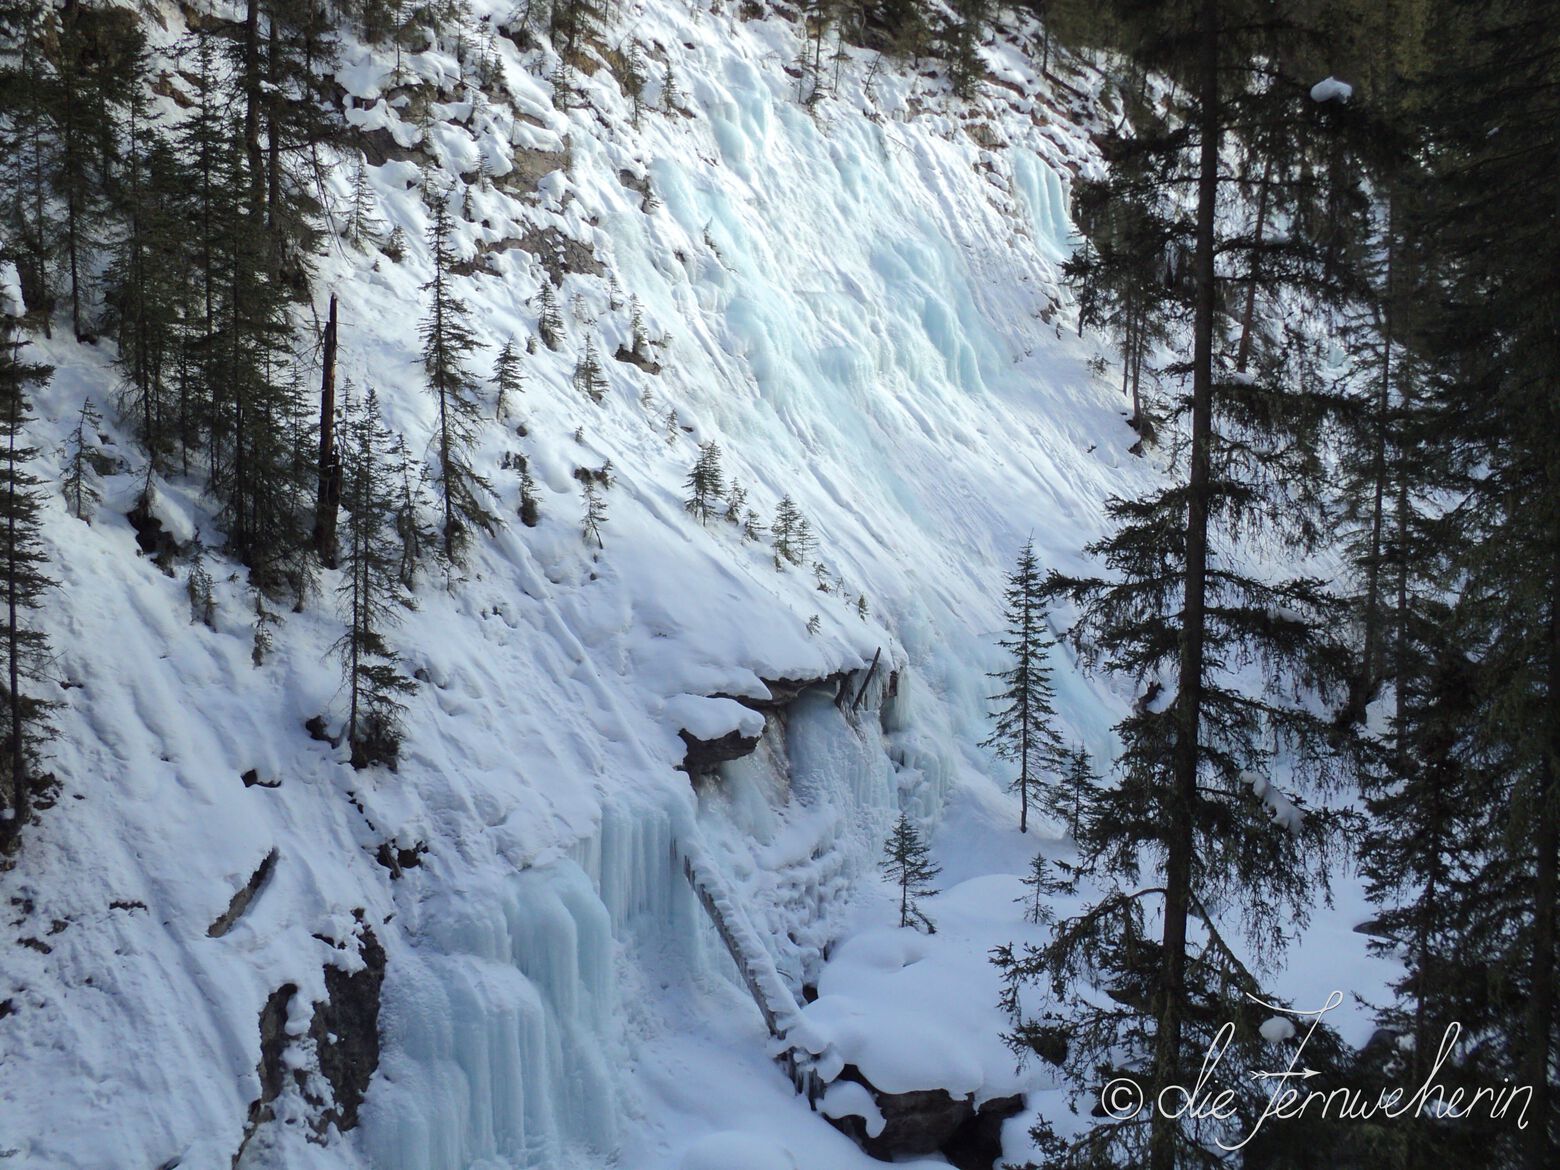 The snow & ice-covered walls of Banff National Park's Johnston Canyon in the winter.